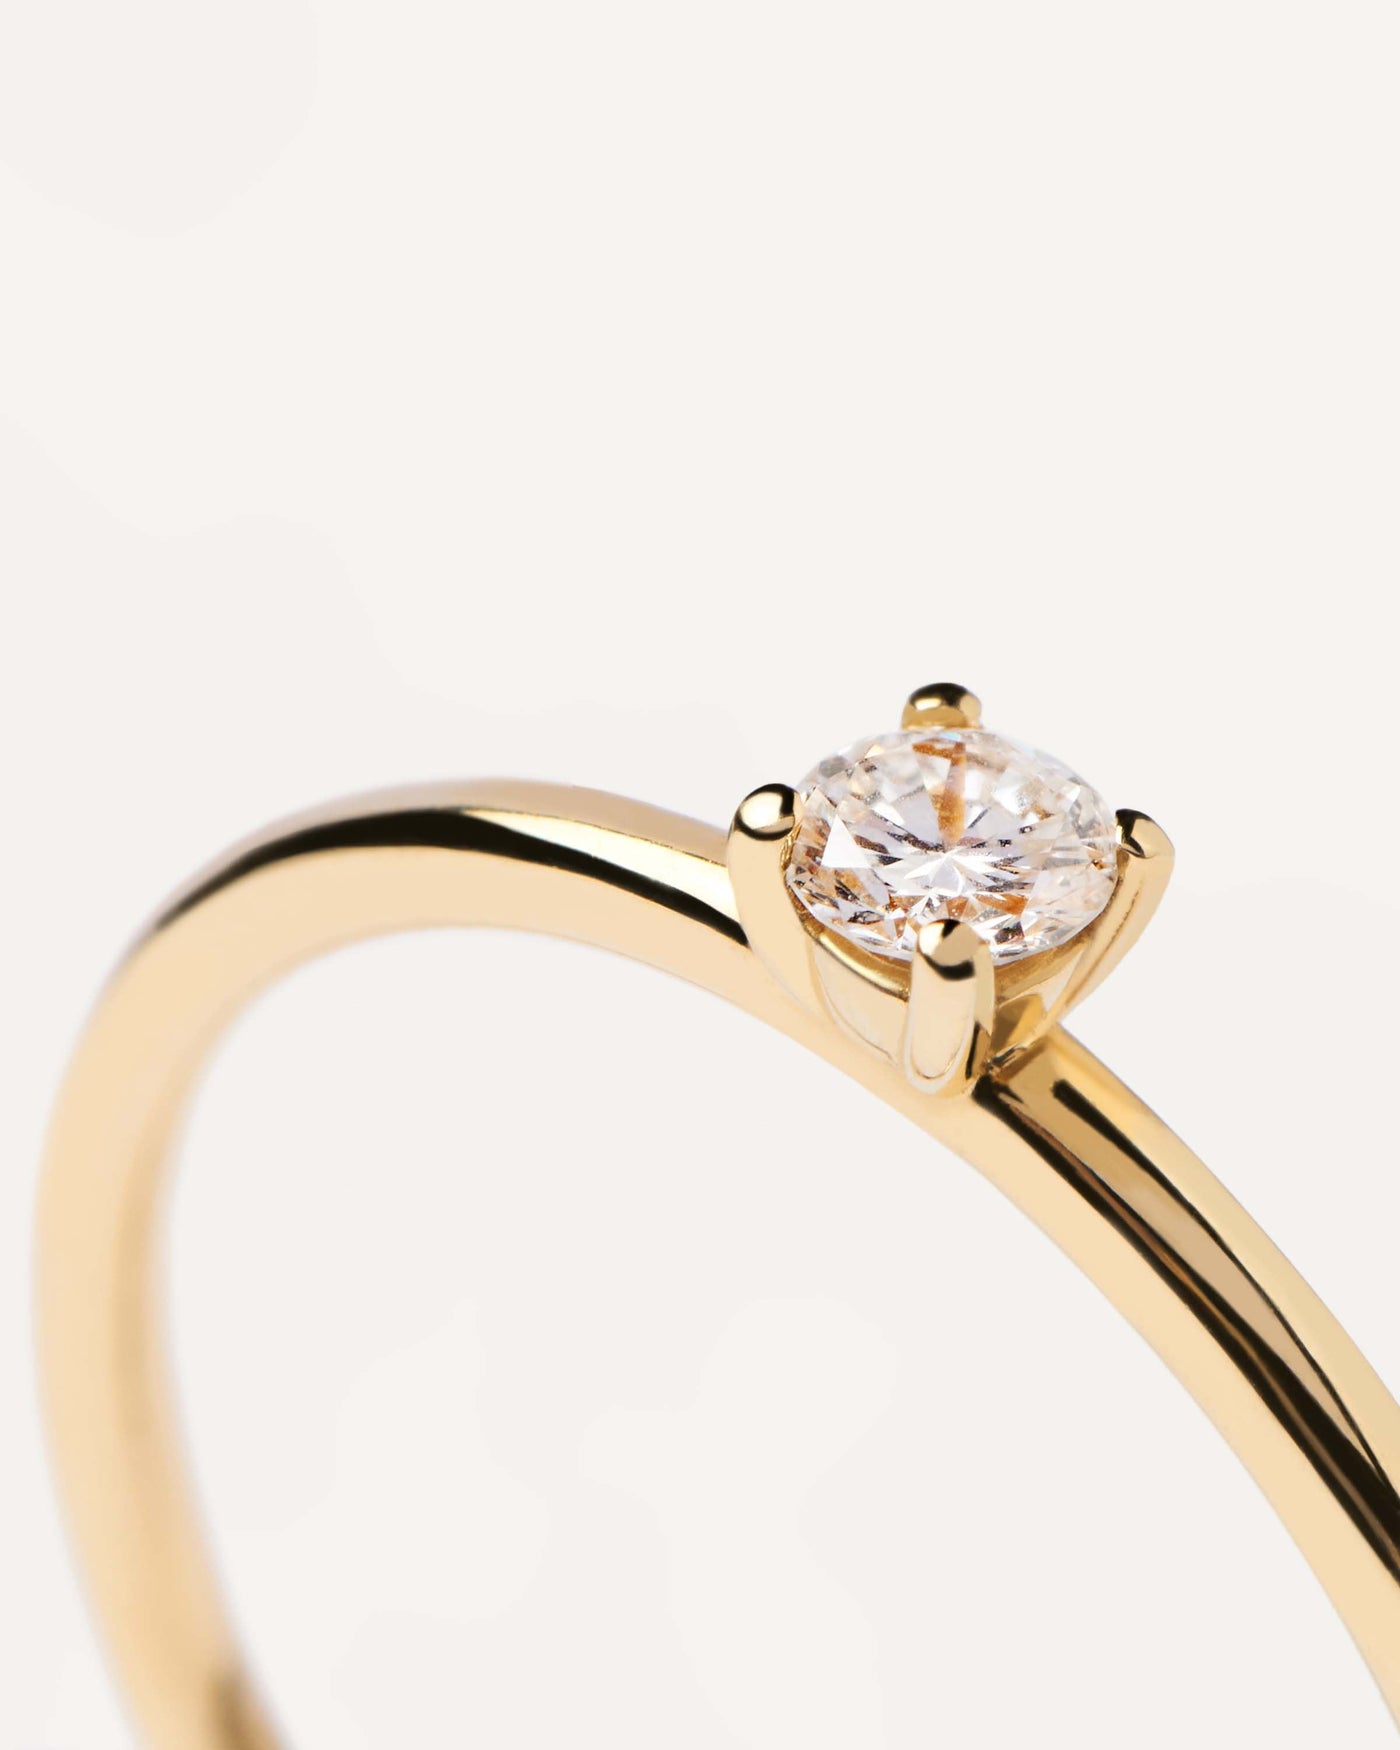 2023 Selection | Diamonds and gold Solitaire Mini Ring. Solid yellow gold ring set with a 0.10 carat solitary diamond. Get the latest arrival from PDPAOLA. Place your order safely and get this Best Seller. Free Shipping.